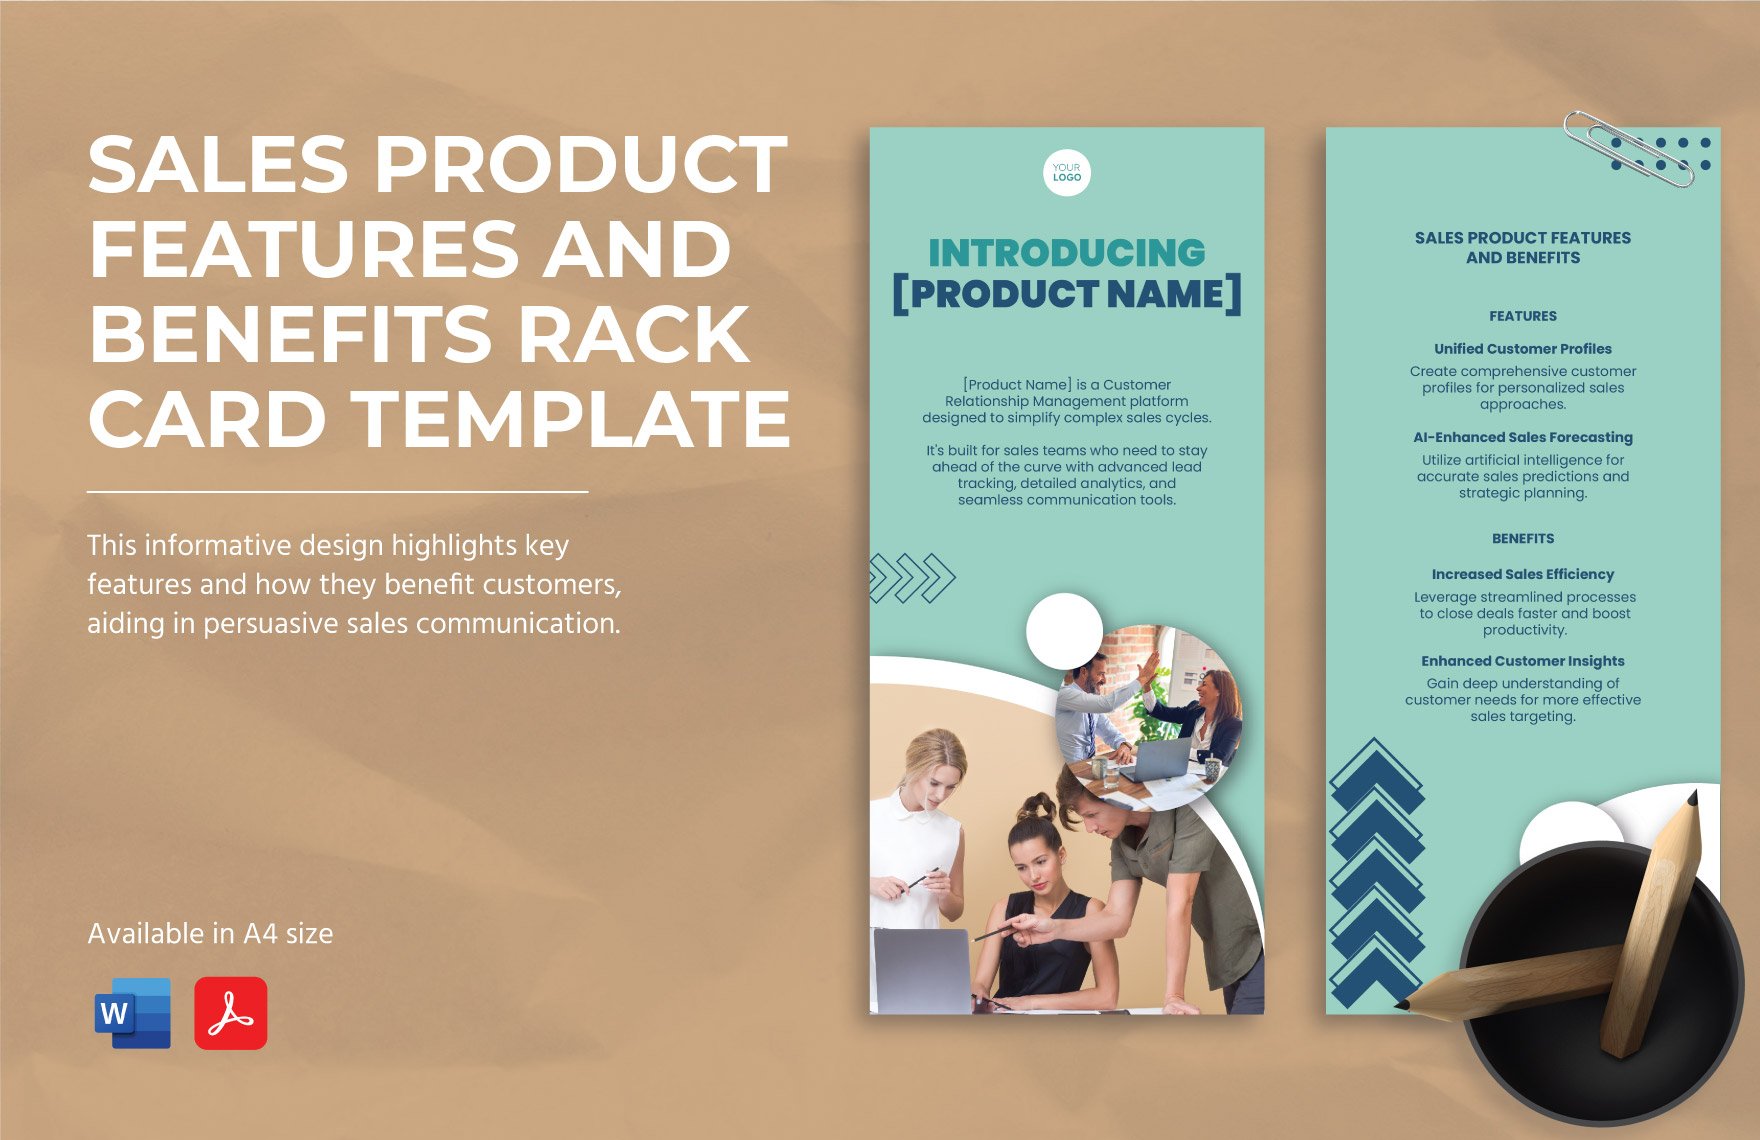 Sales Product Features and Benefits Rack Card Template